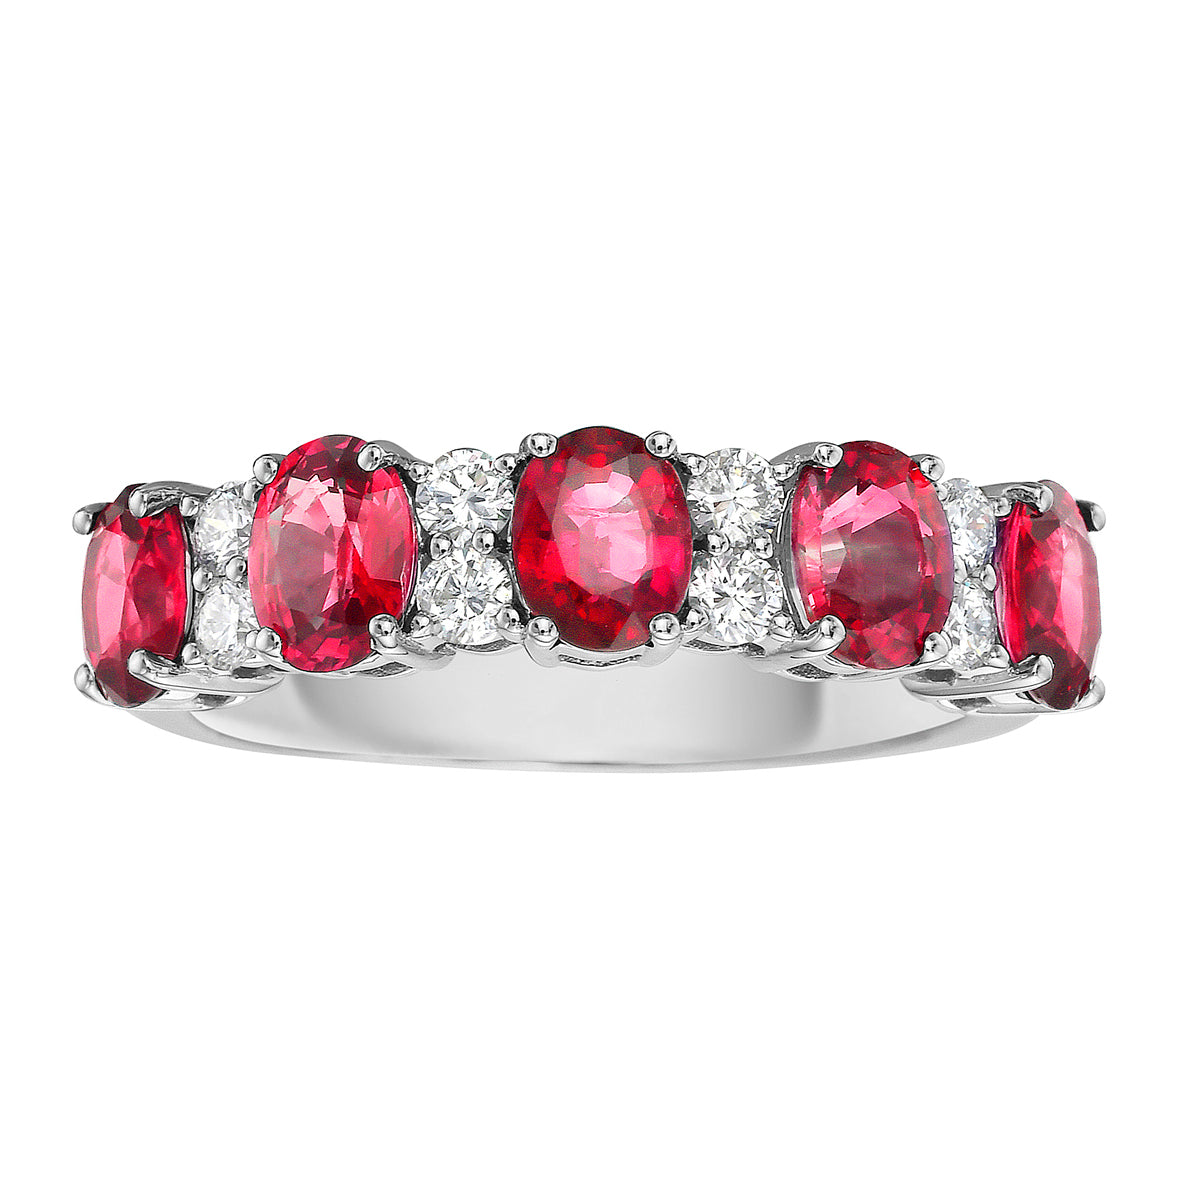 Ring 14KW/2.0G 5RUBY-1.89CT 8RD-0.26CT